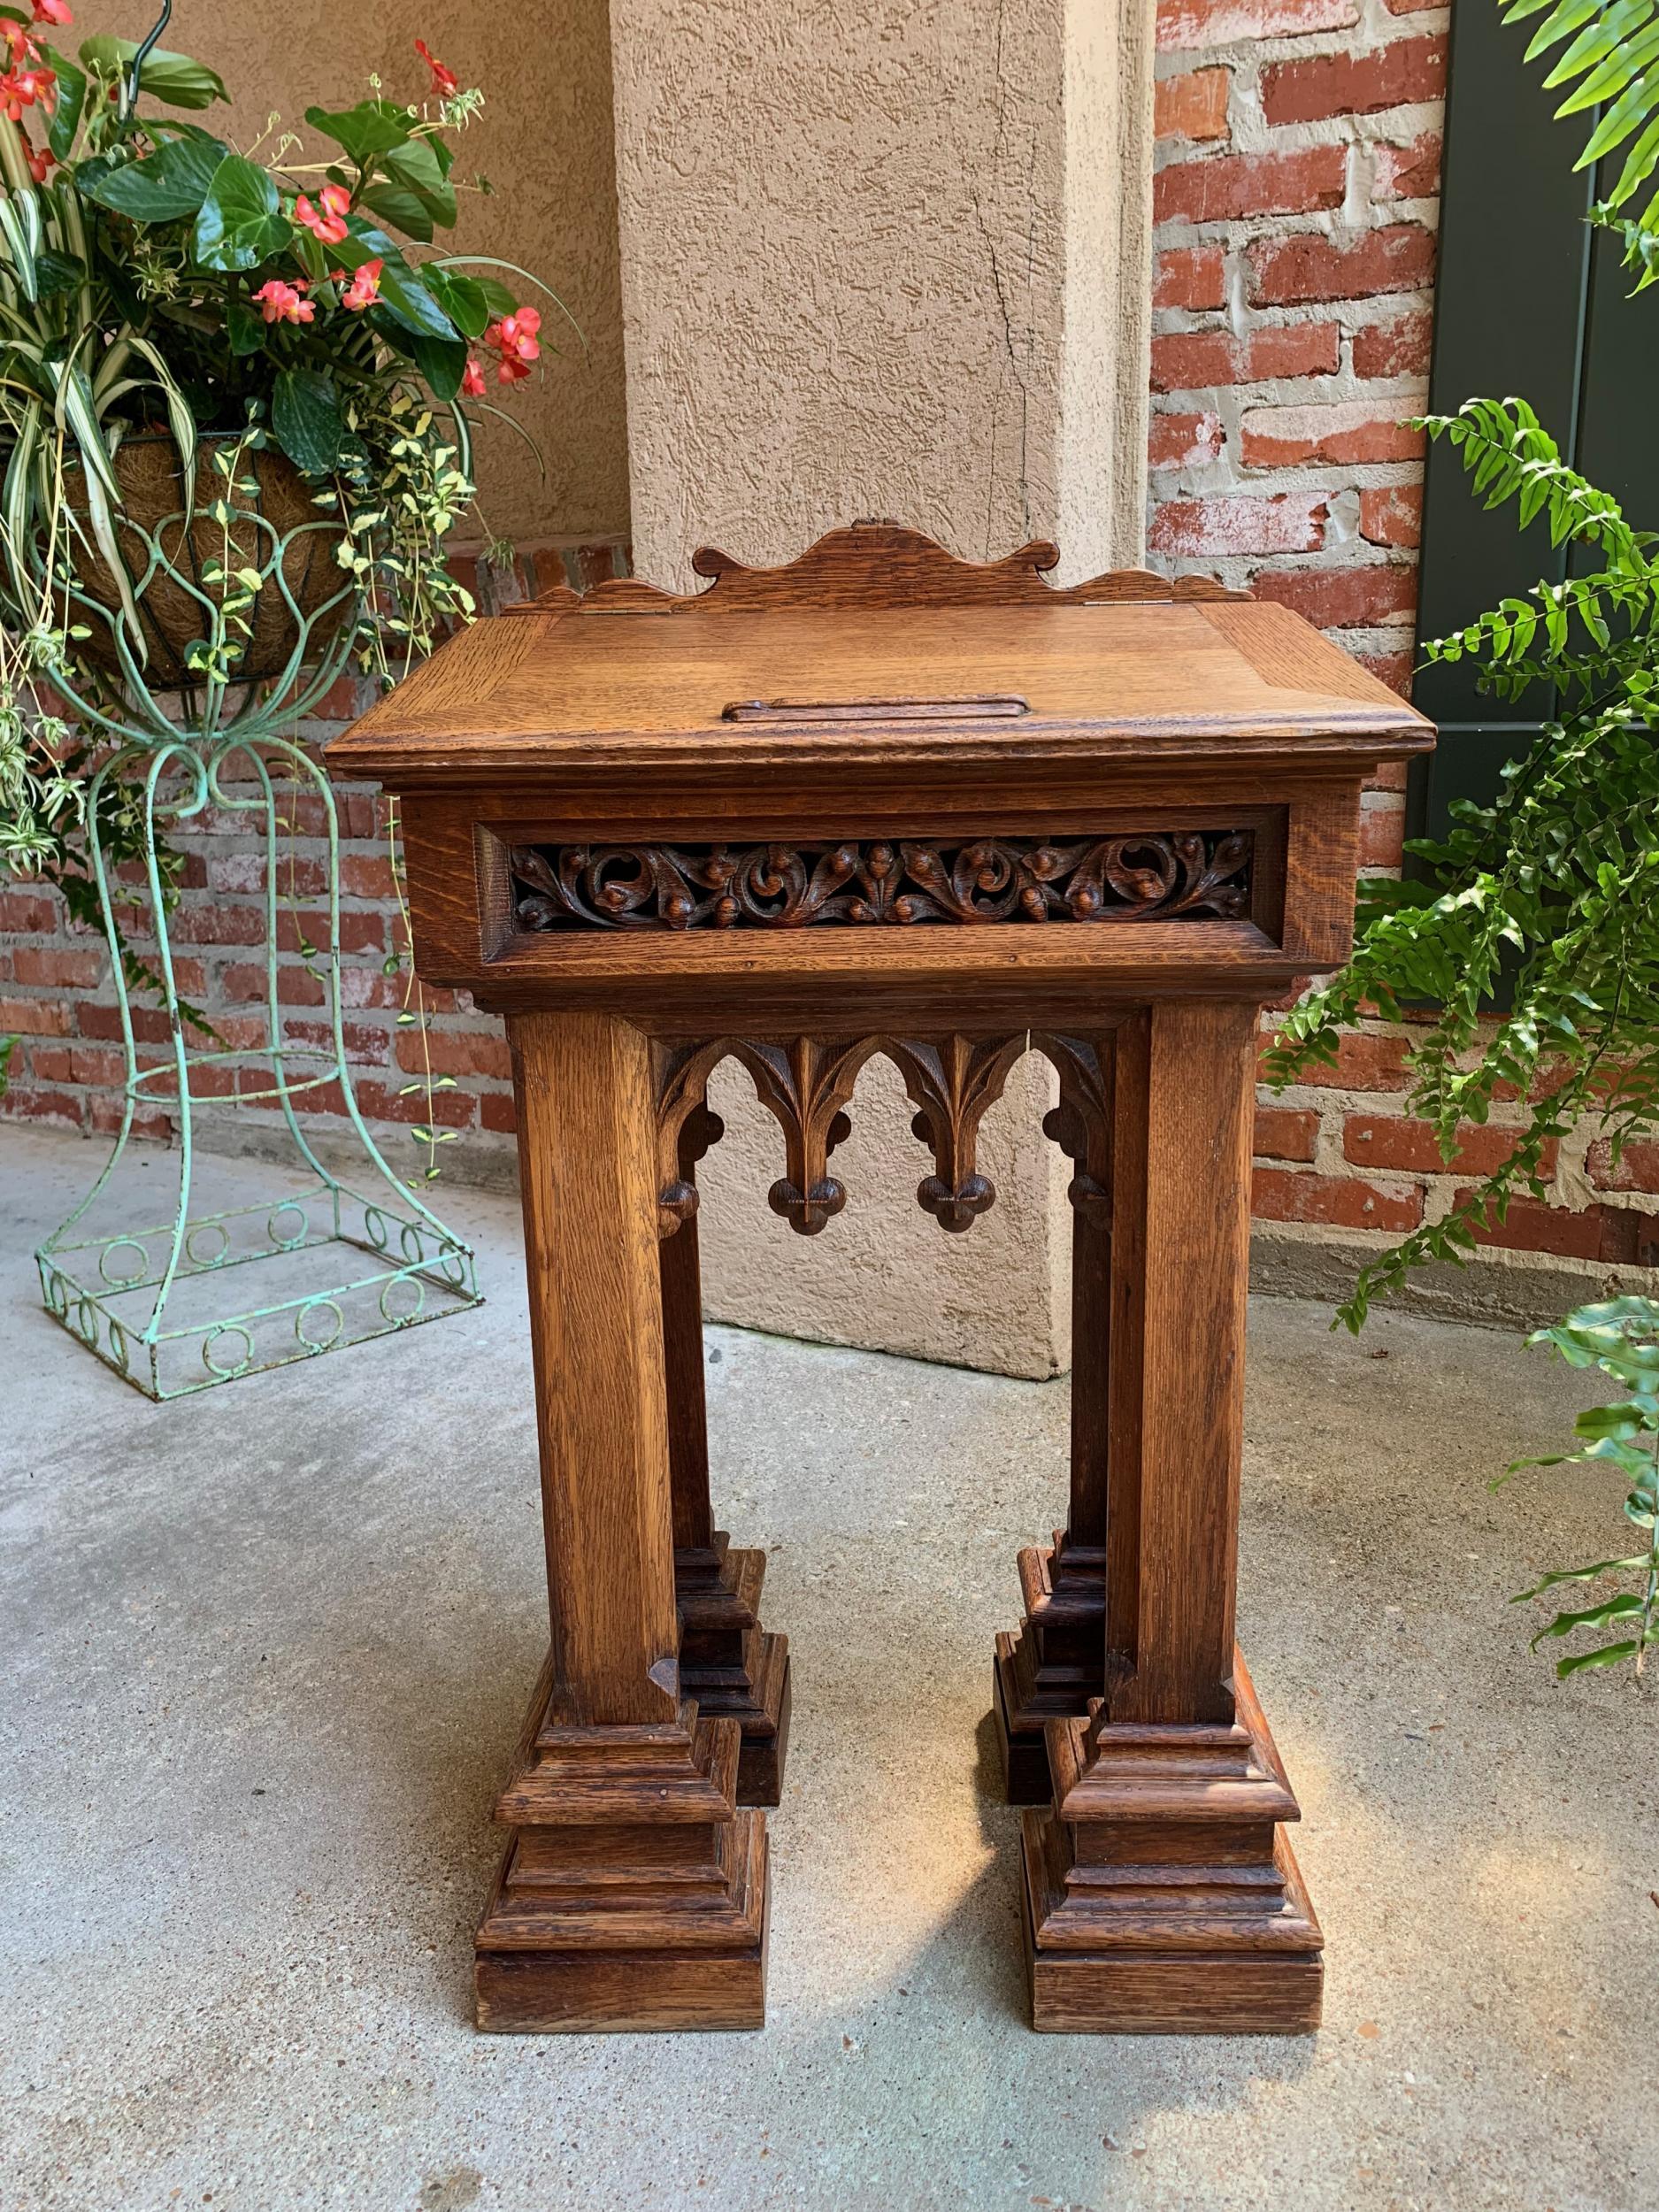 Antique French carved oak Podium table top Lectern Gothic Liturgical Bible box

~Direct from France~
~Beautiful antique French carved oak lectern, one of several unique liturgical items in our most recent container~
~Scalloped edge back crown